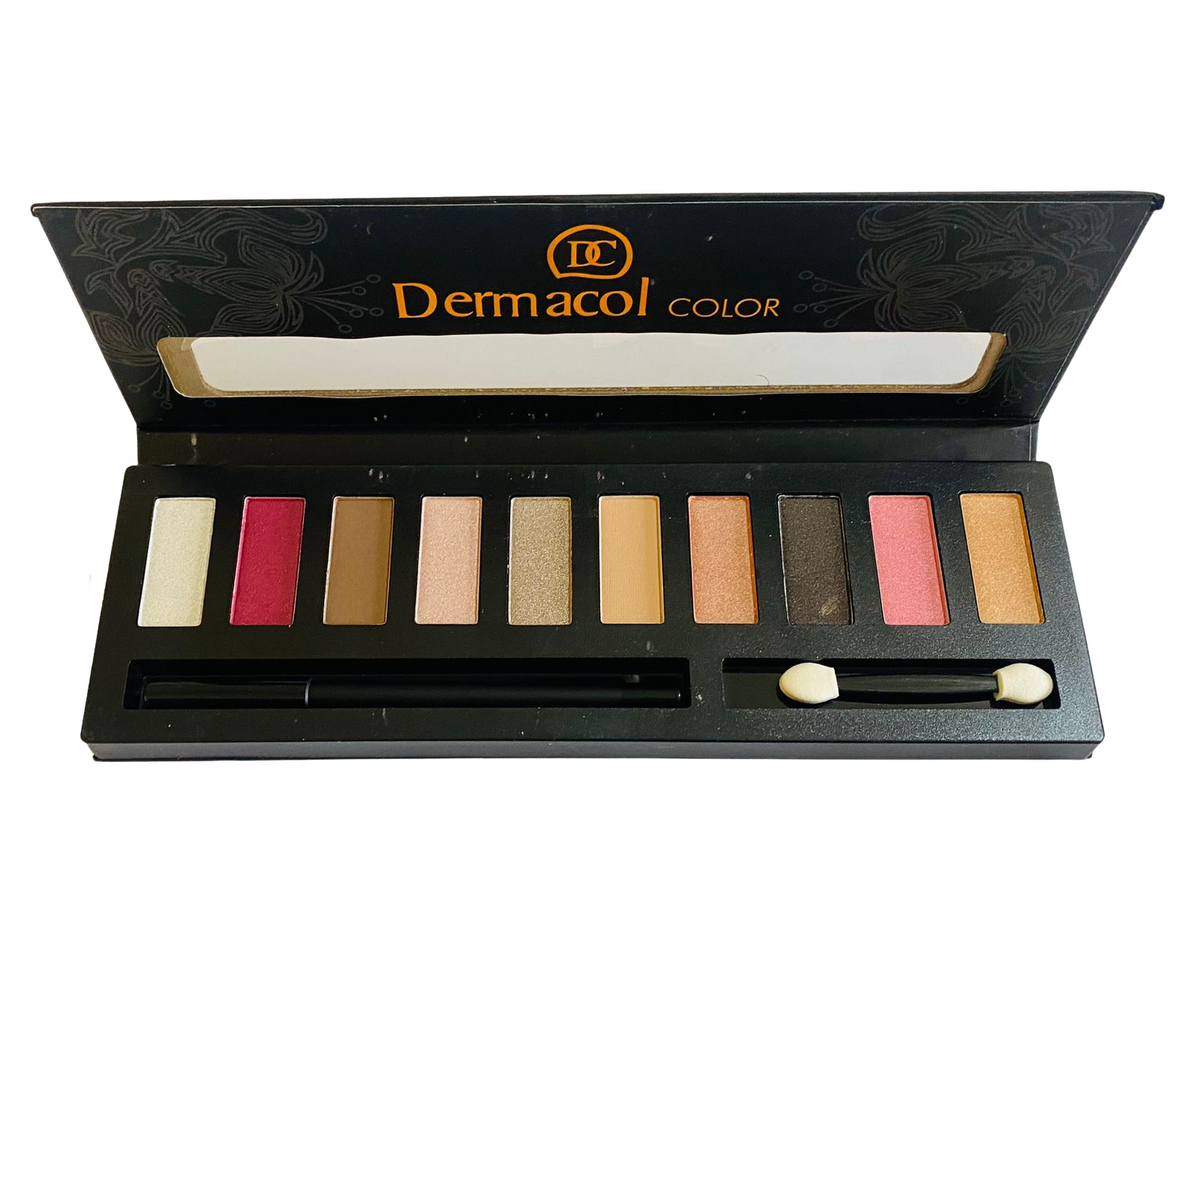 Dermacol Color Beauty Bronze Eyes Shadow